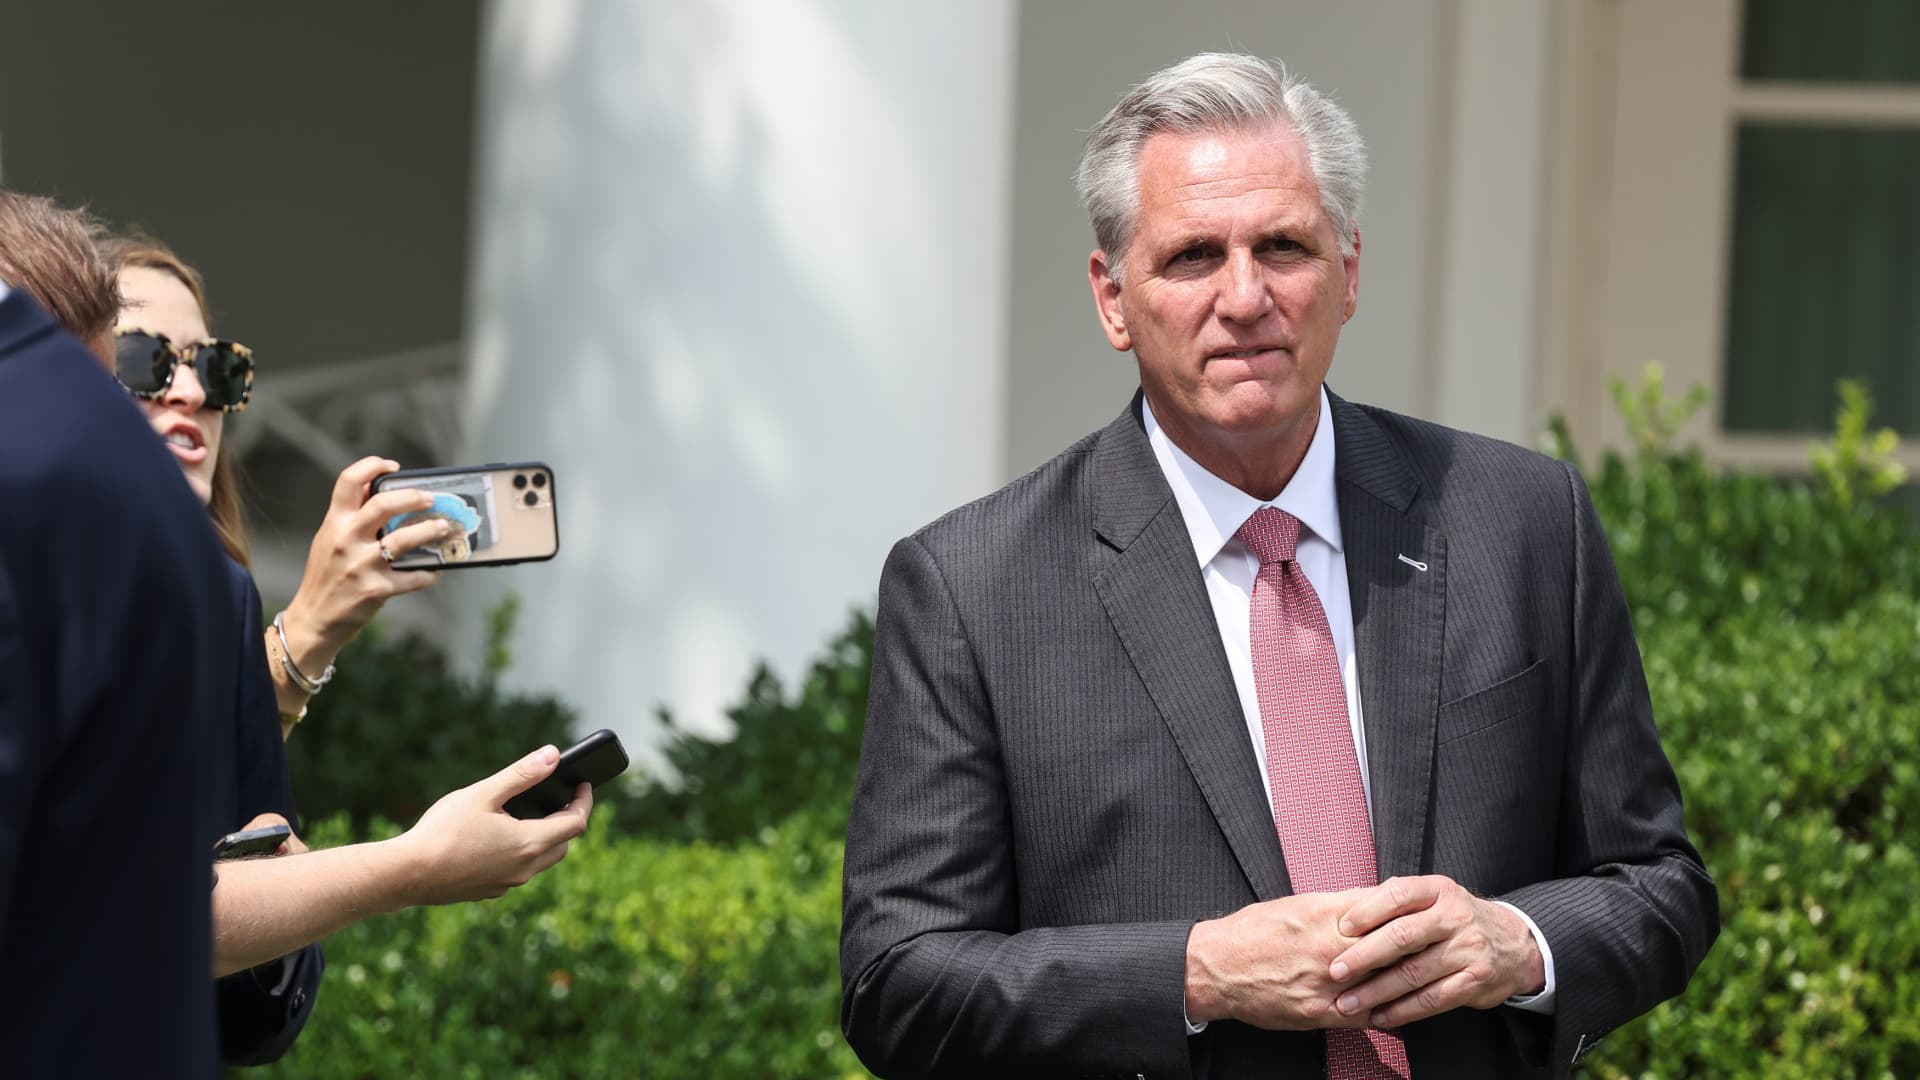 U.S. House Minority Leader Kevin McCarthy (R-CA) arrives for an event to celebrate the 31st anniversary of the Americans with Disabilities Act (ADA) in the White House Rose Garden in Washington, U.S., July 26, 2021.